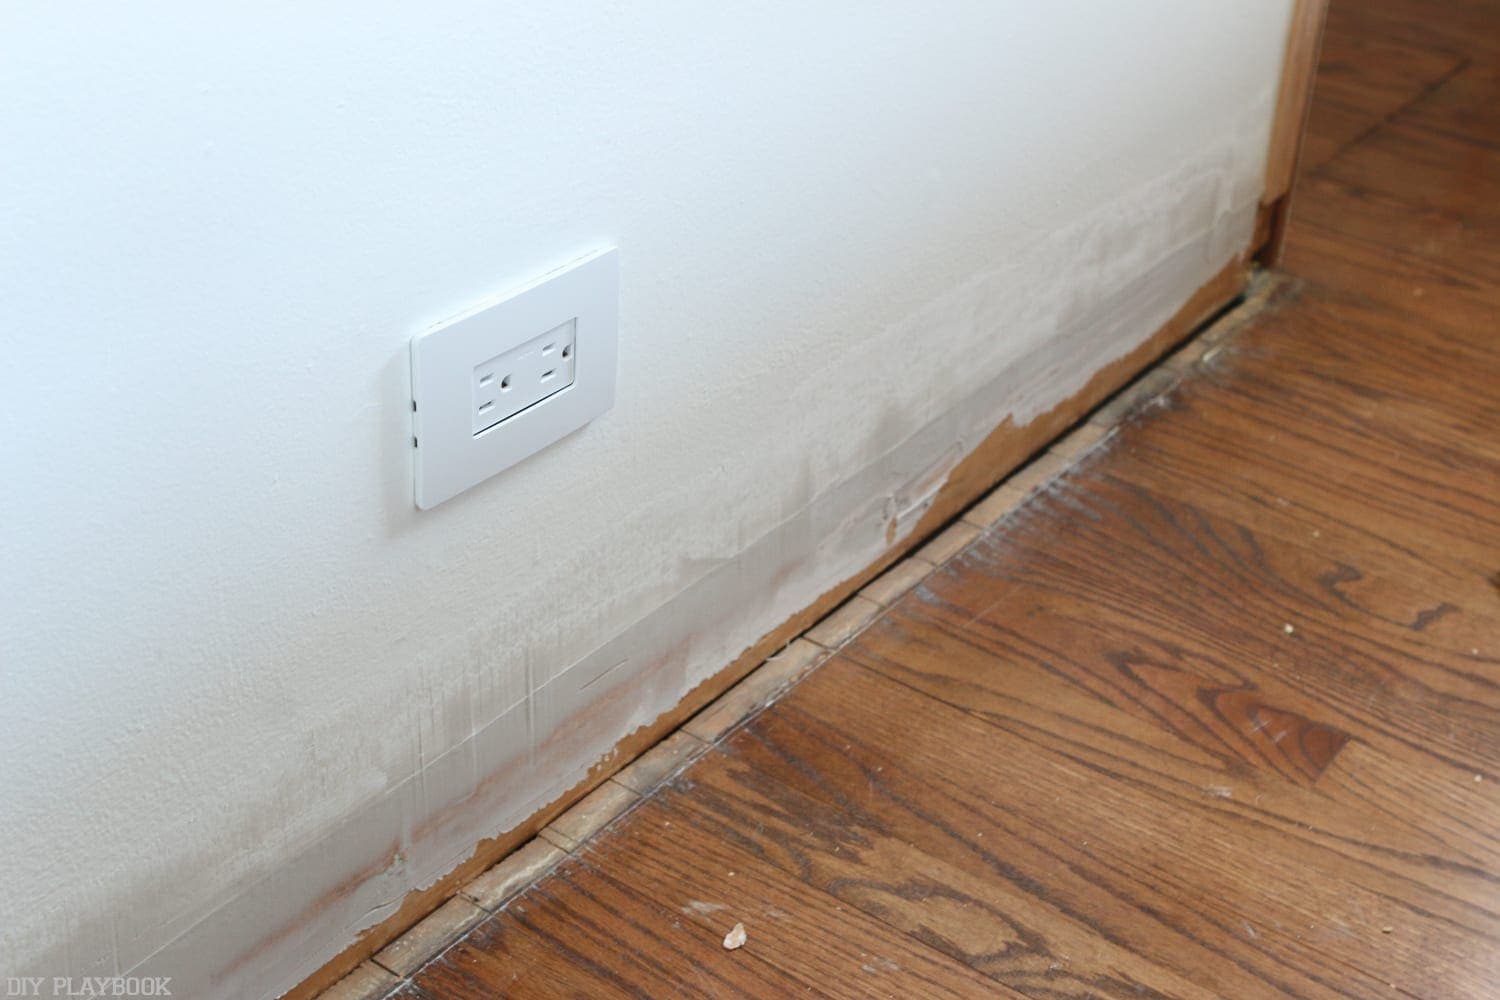 Be sure to patch all the baseboards